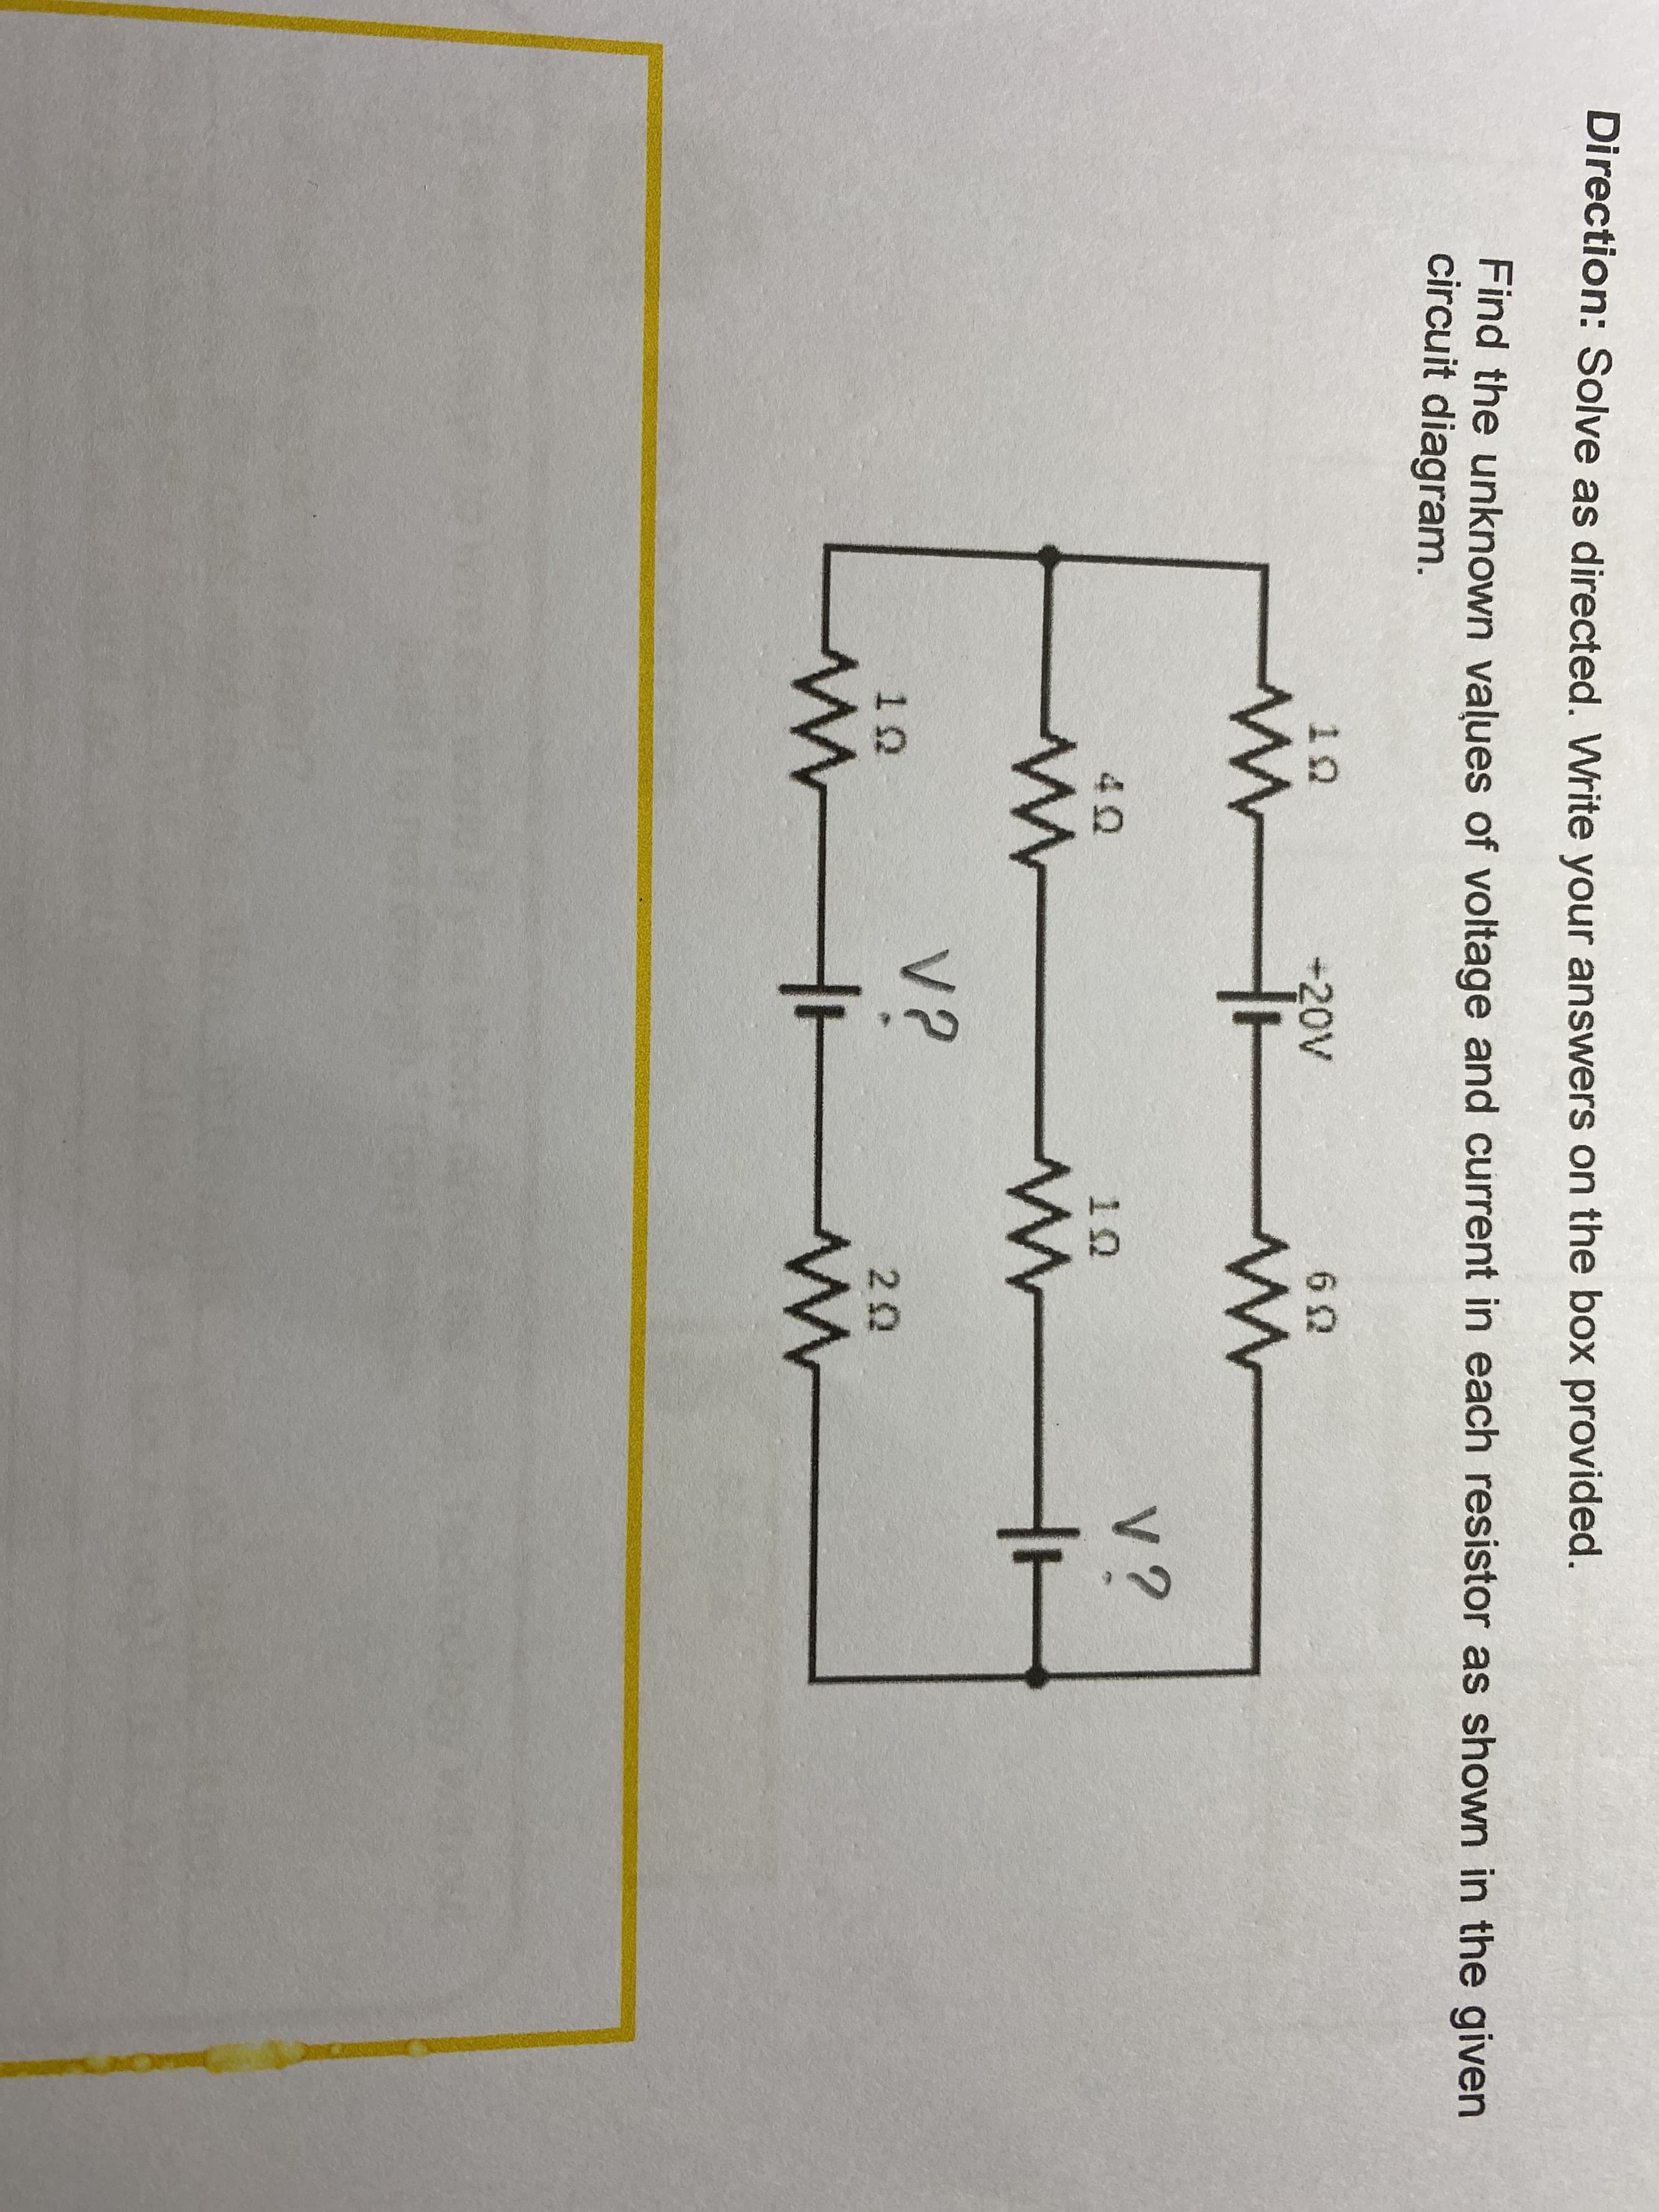 Direction: Solve as directed. Write your answers on the box provided.
Find the unknown values of voltage and current in each resistor as shown in the given
circuit diagram.
10
+20V
v?
10
V?
10
20
